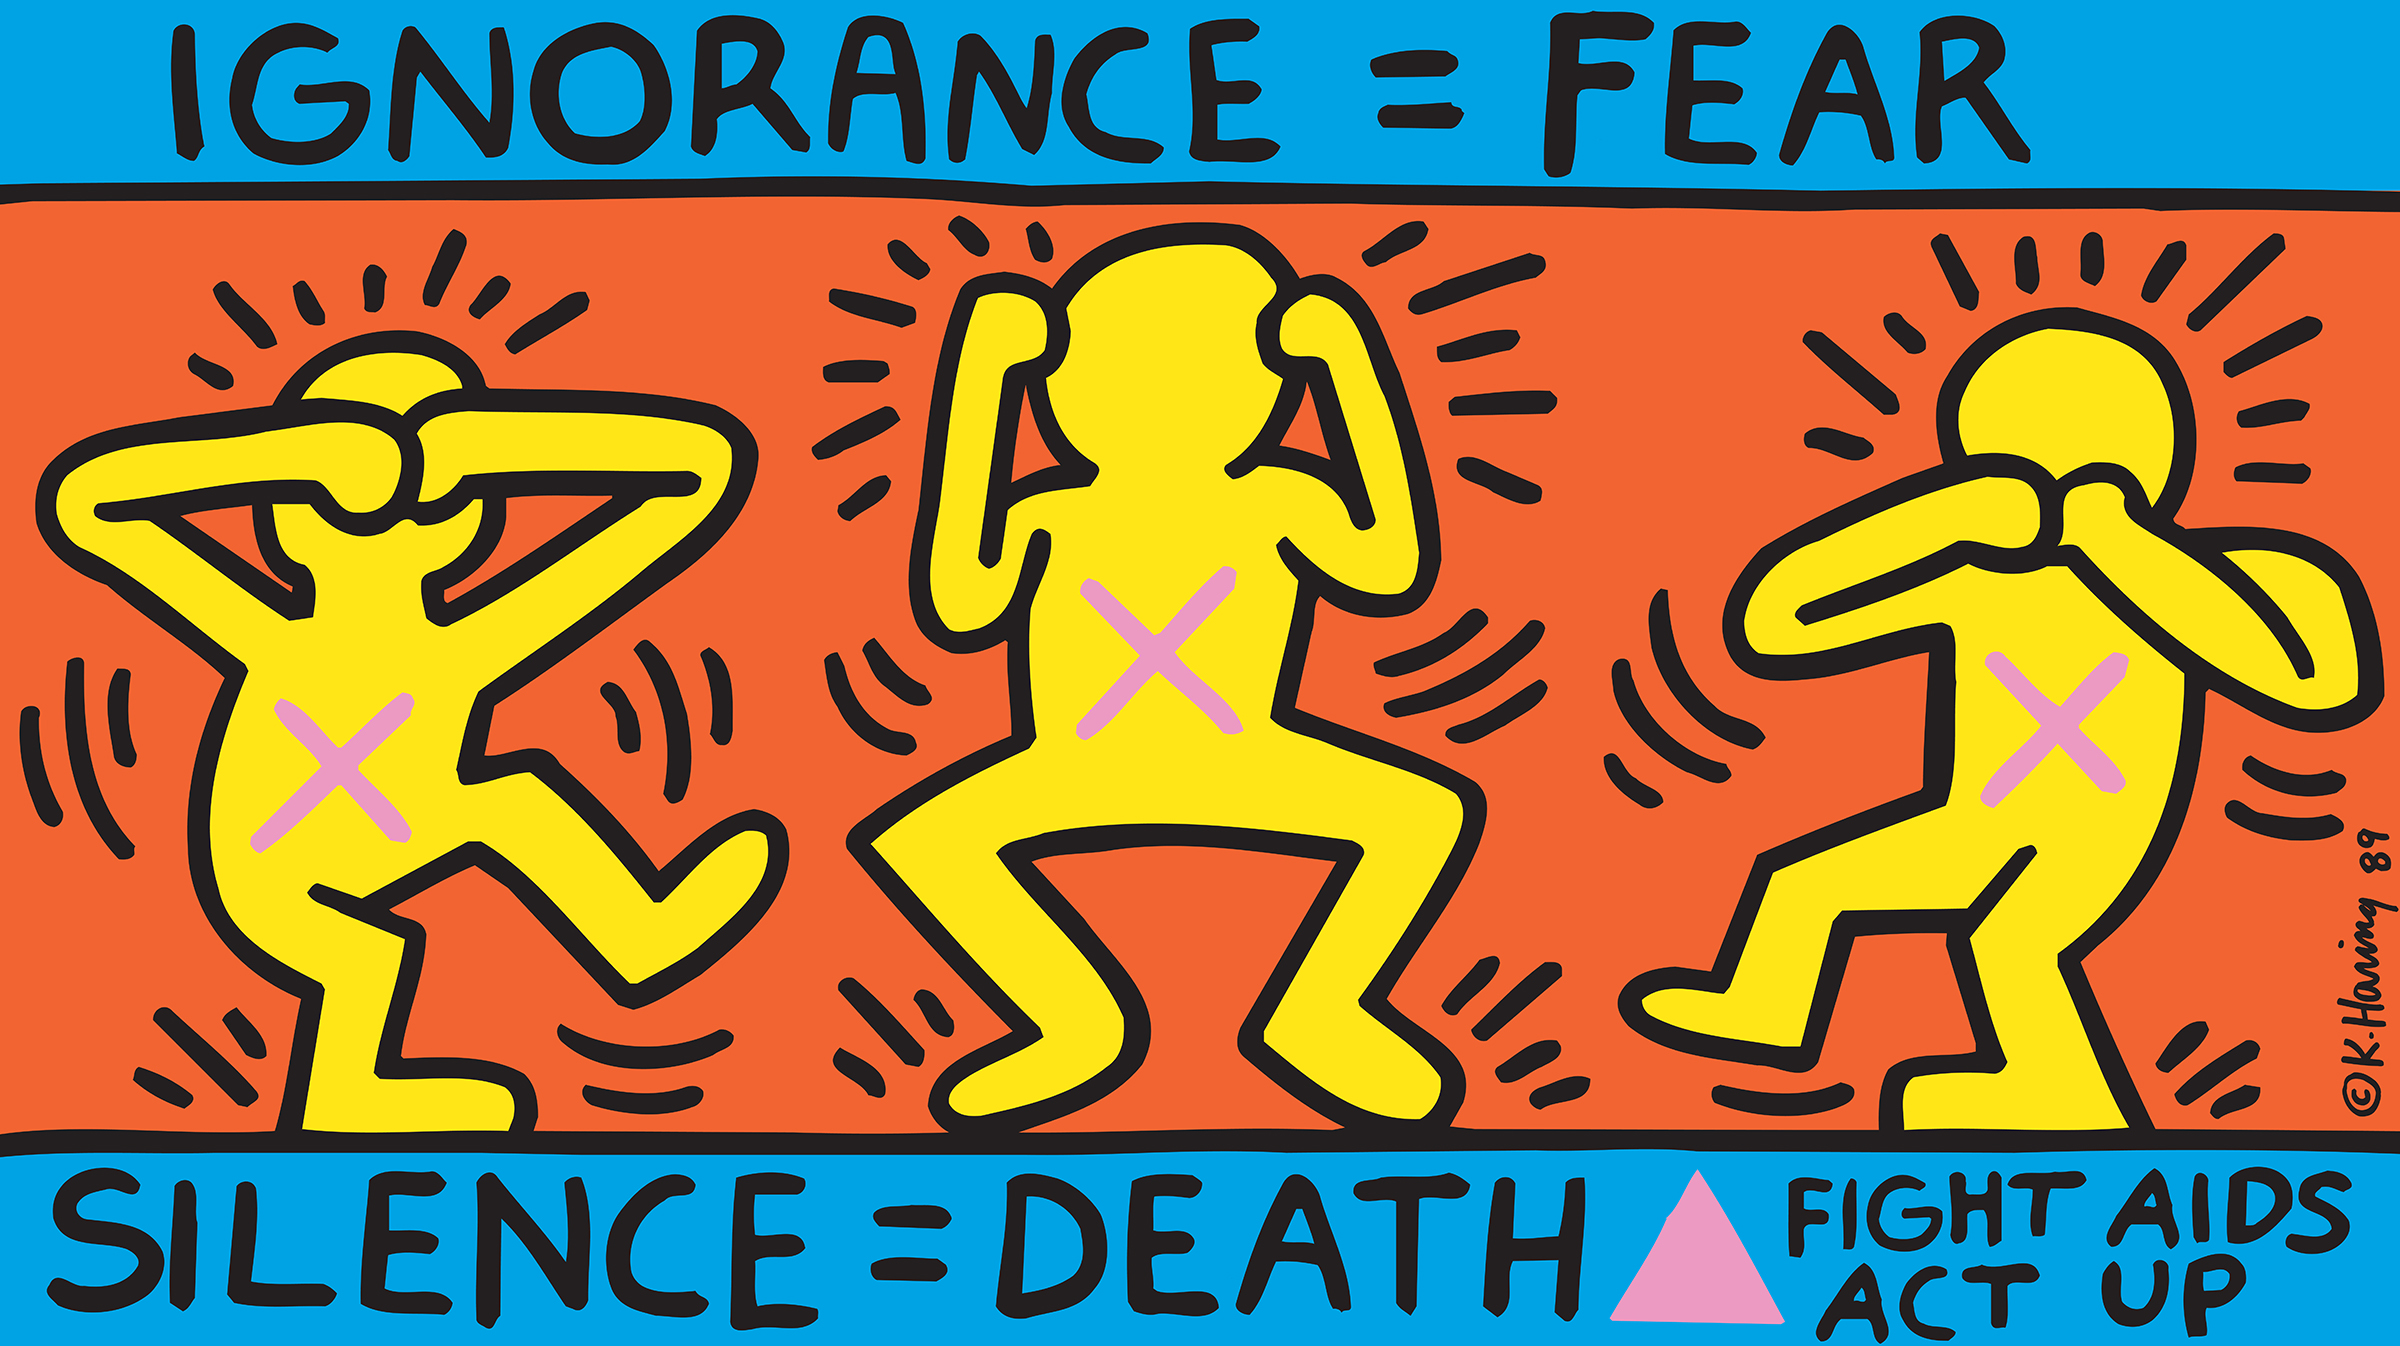 Ignorance = Fear, Silence = Death, Act Up poster, 1989